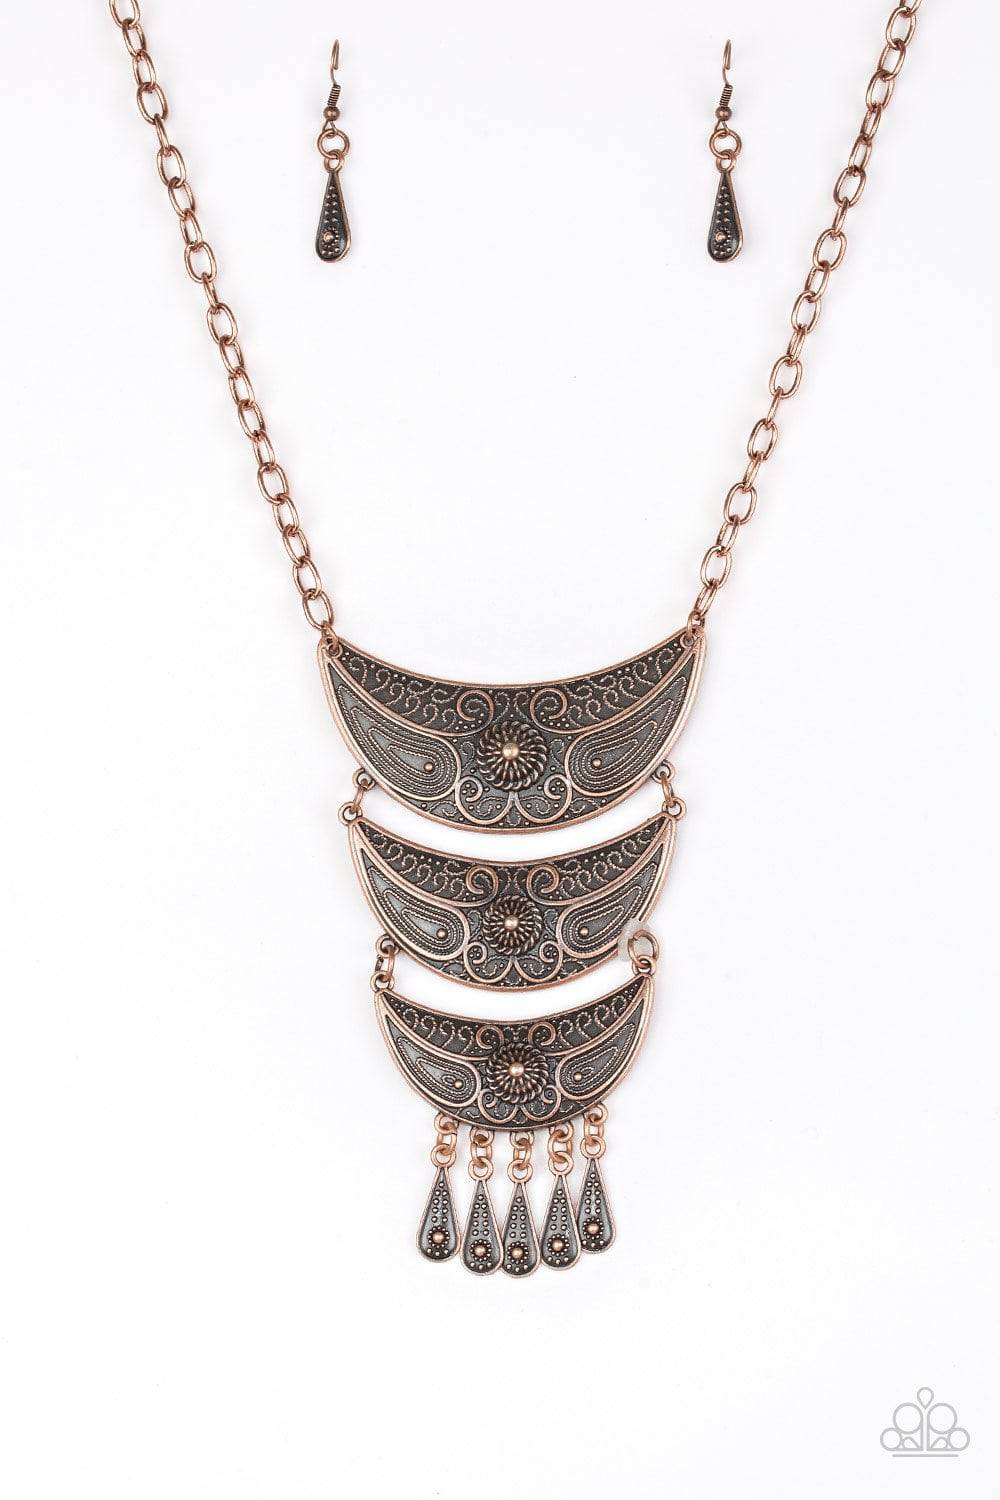 A151 -Go STEER Crazy Copper Necklace by Paparazzi Accessories on Fancy5Fashion.com